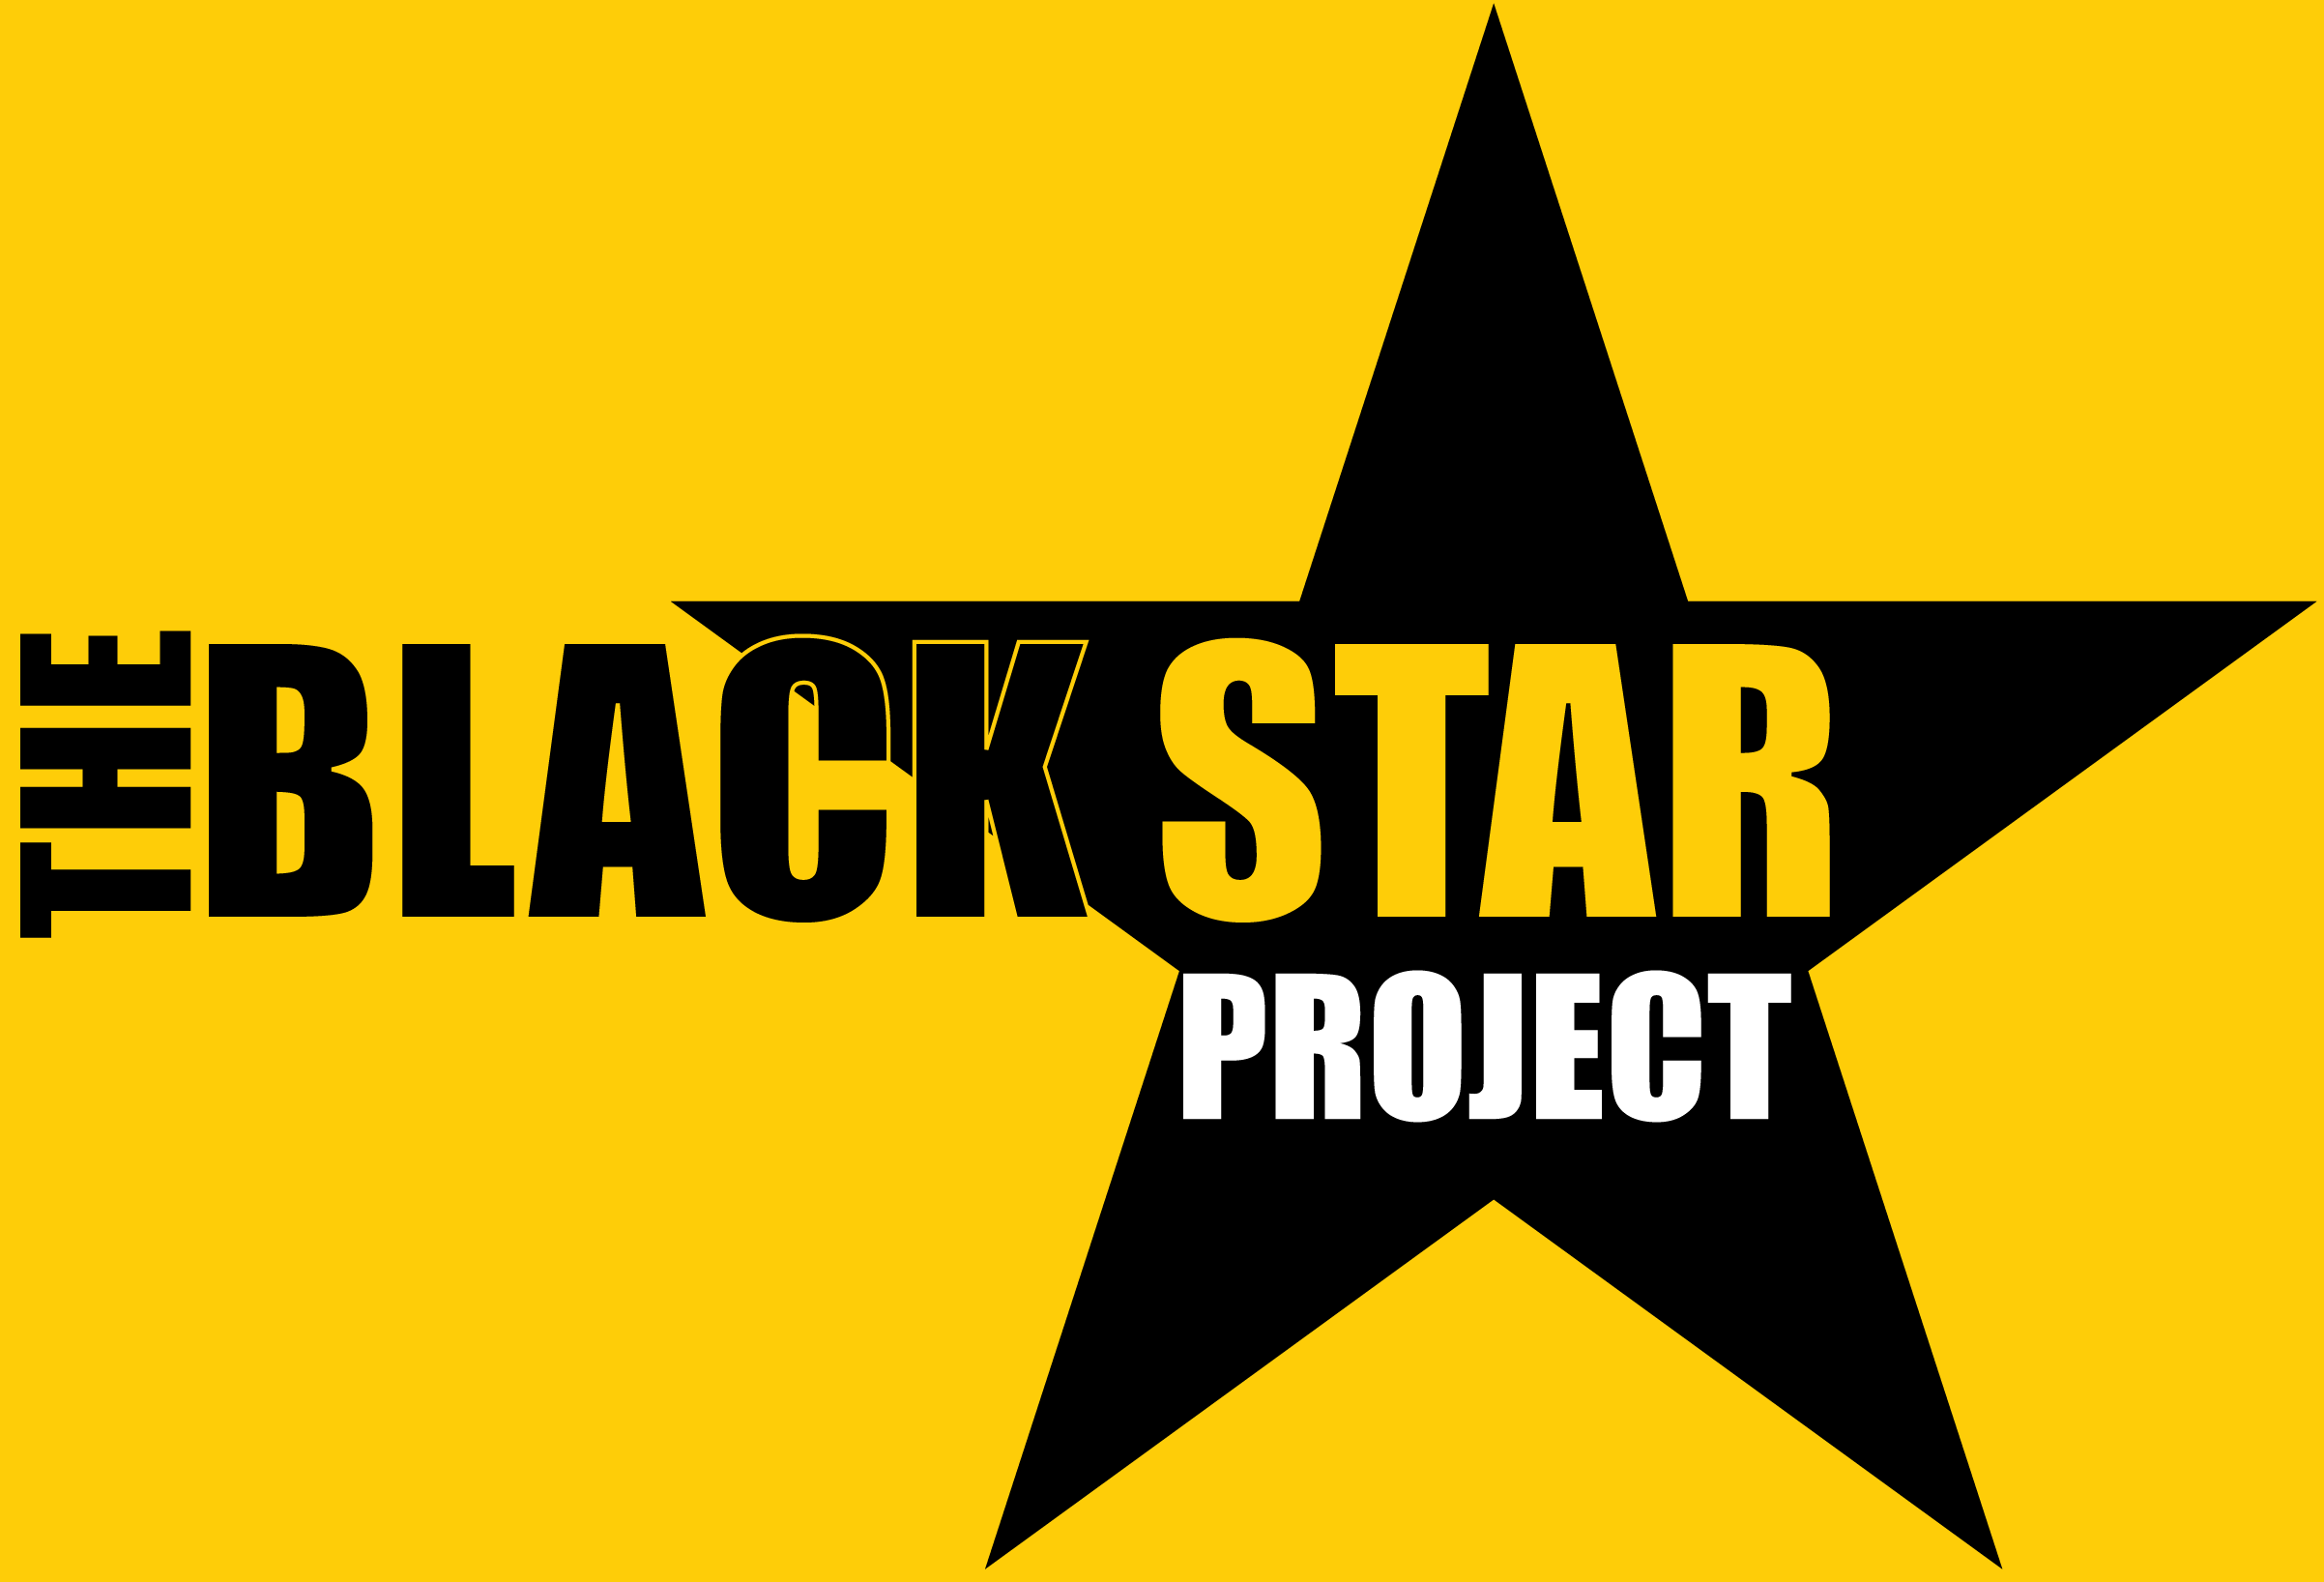 The Black Star Project